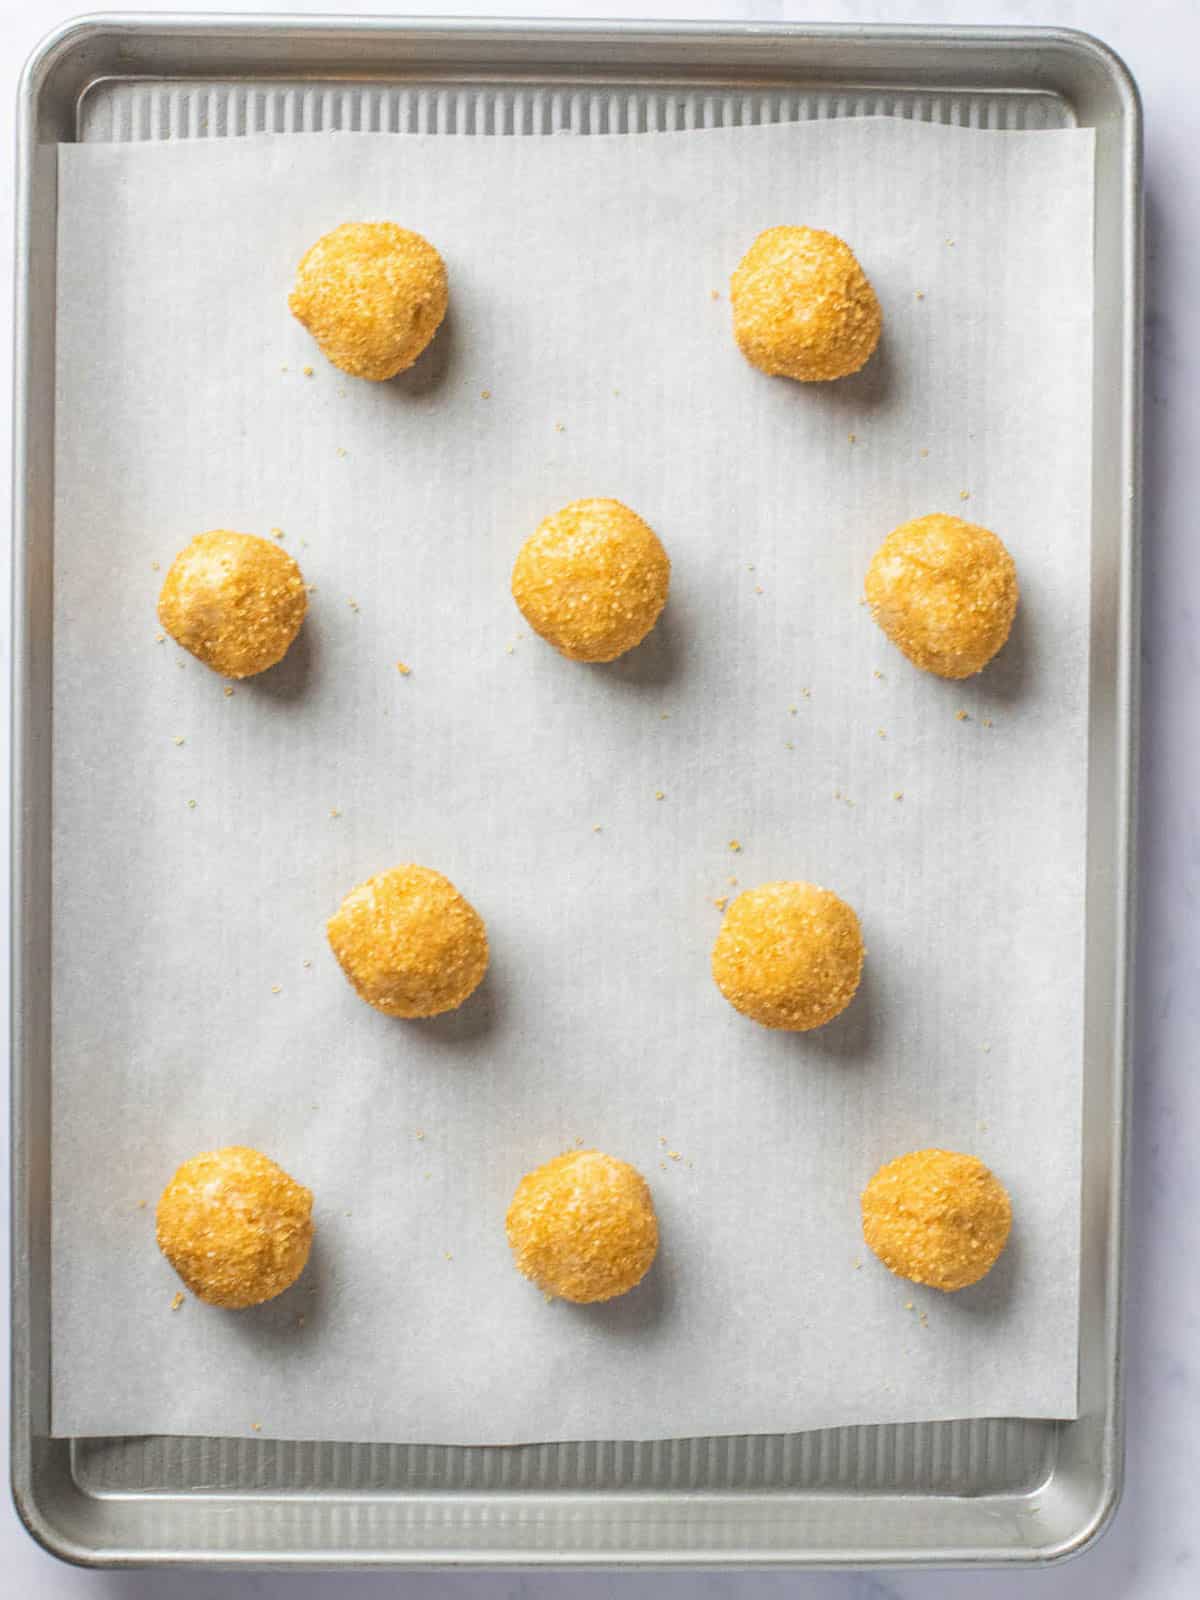 Honey cookie batter rolled into balls and placed on baking sheet with parchment.